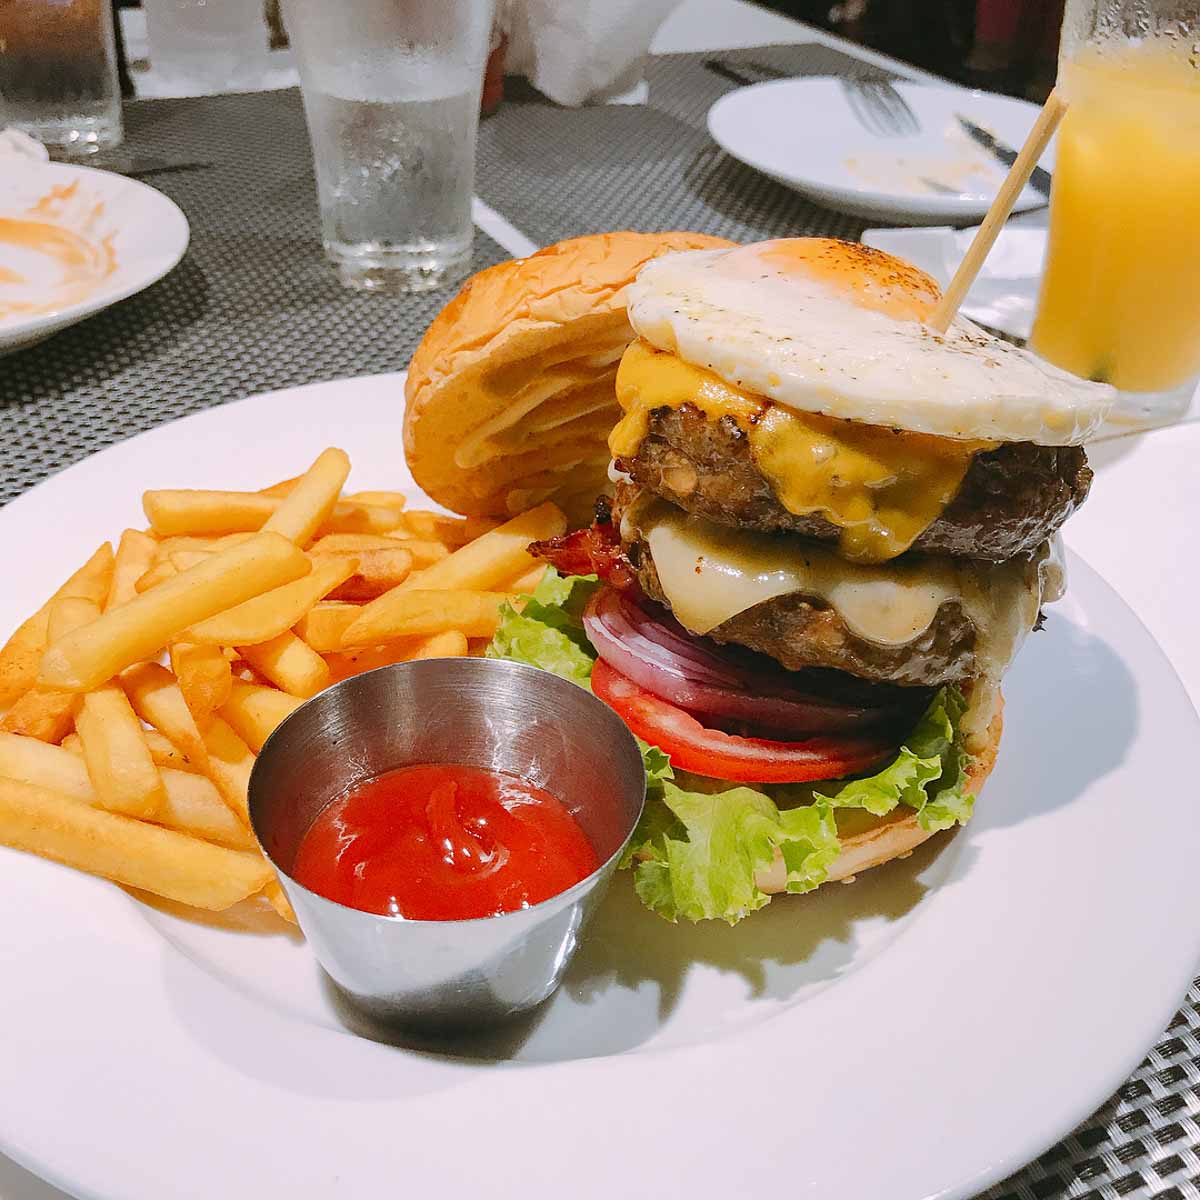 American Food and Burgers from S&L Diner - Things to Eat in Hanoi